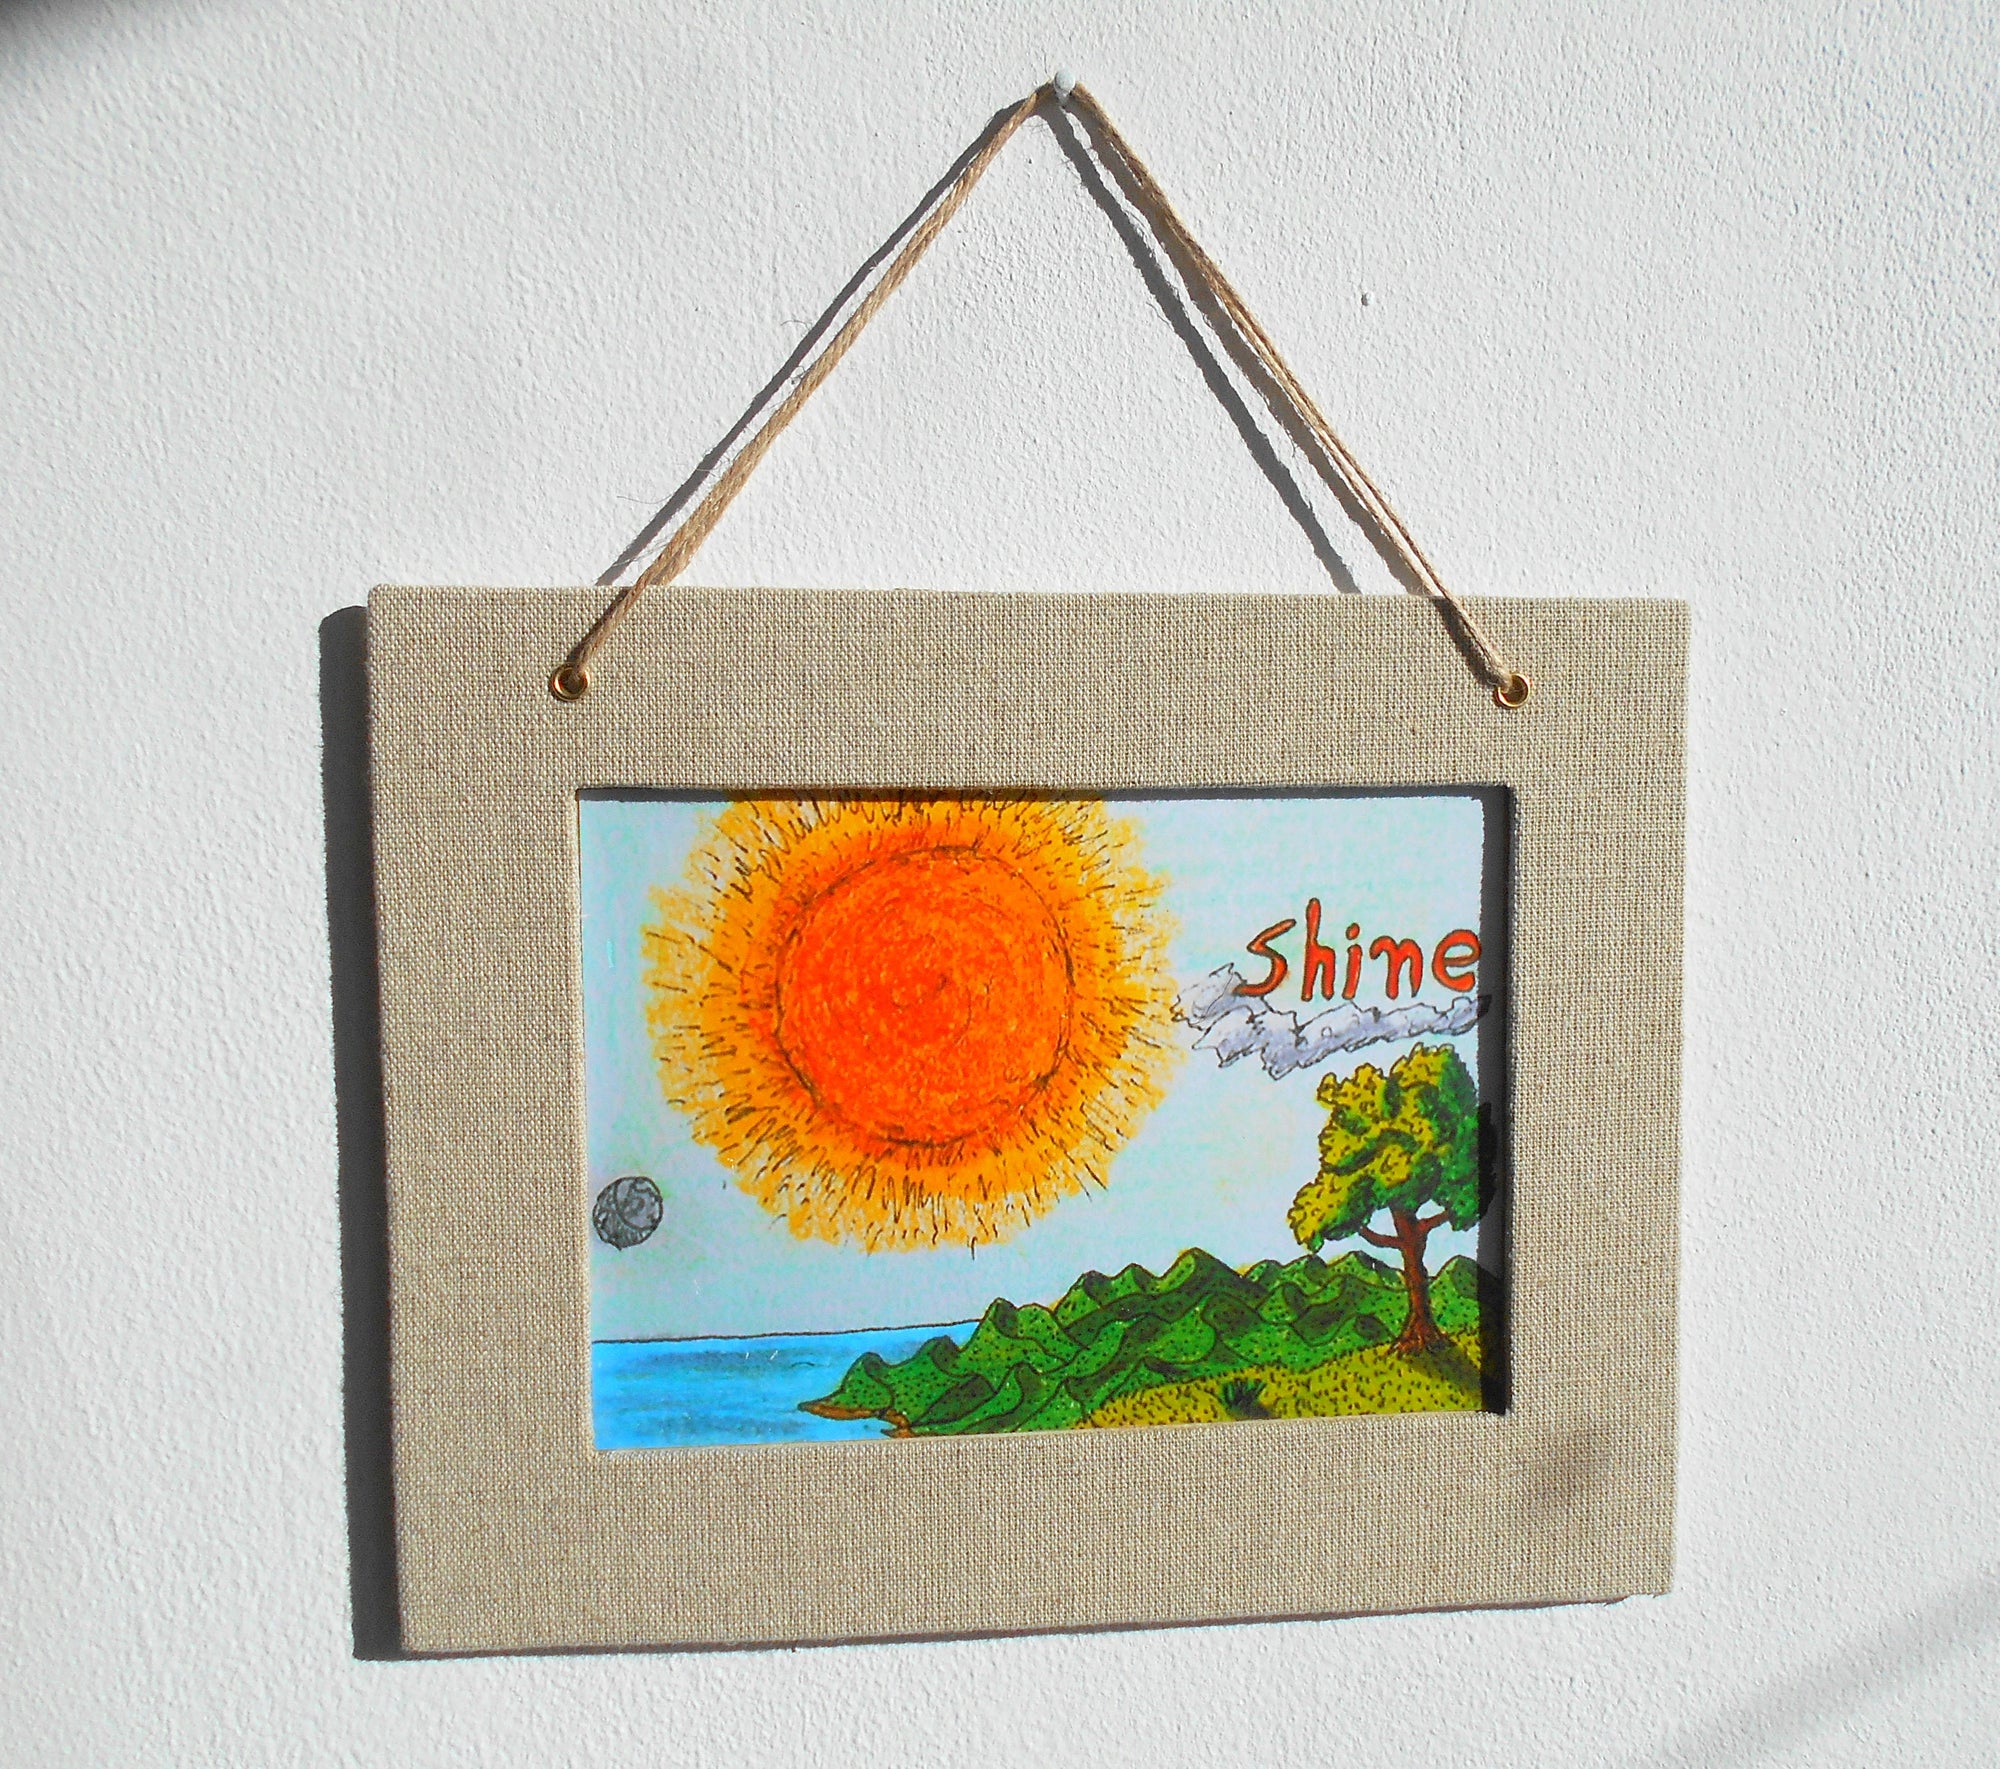 Sun wall art decor- 'Shine' Sun-Tree-Sea inspirational poster with linen fabric-wrapped frame- landscape art hanging signed by Hristo Hvoynev